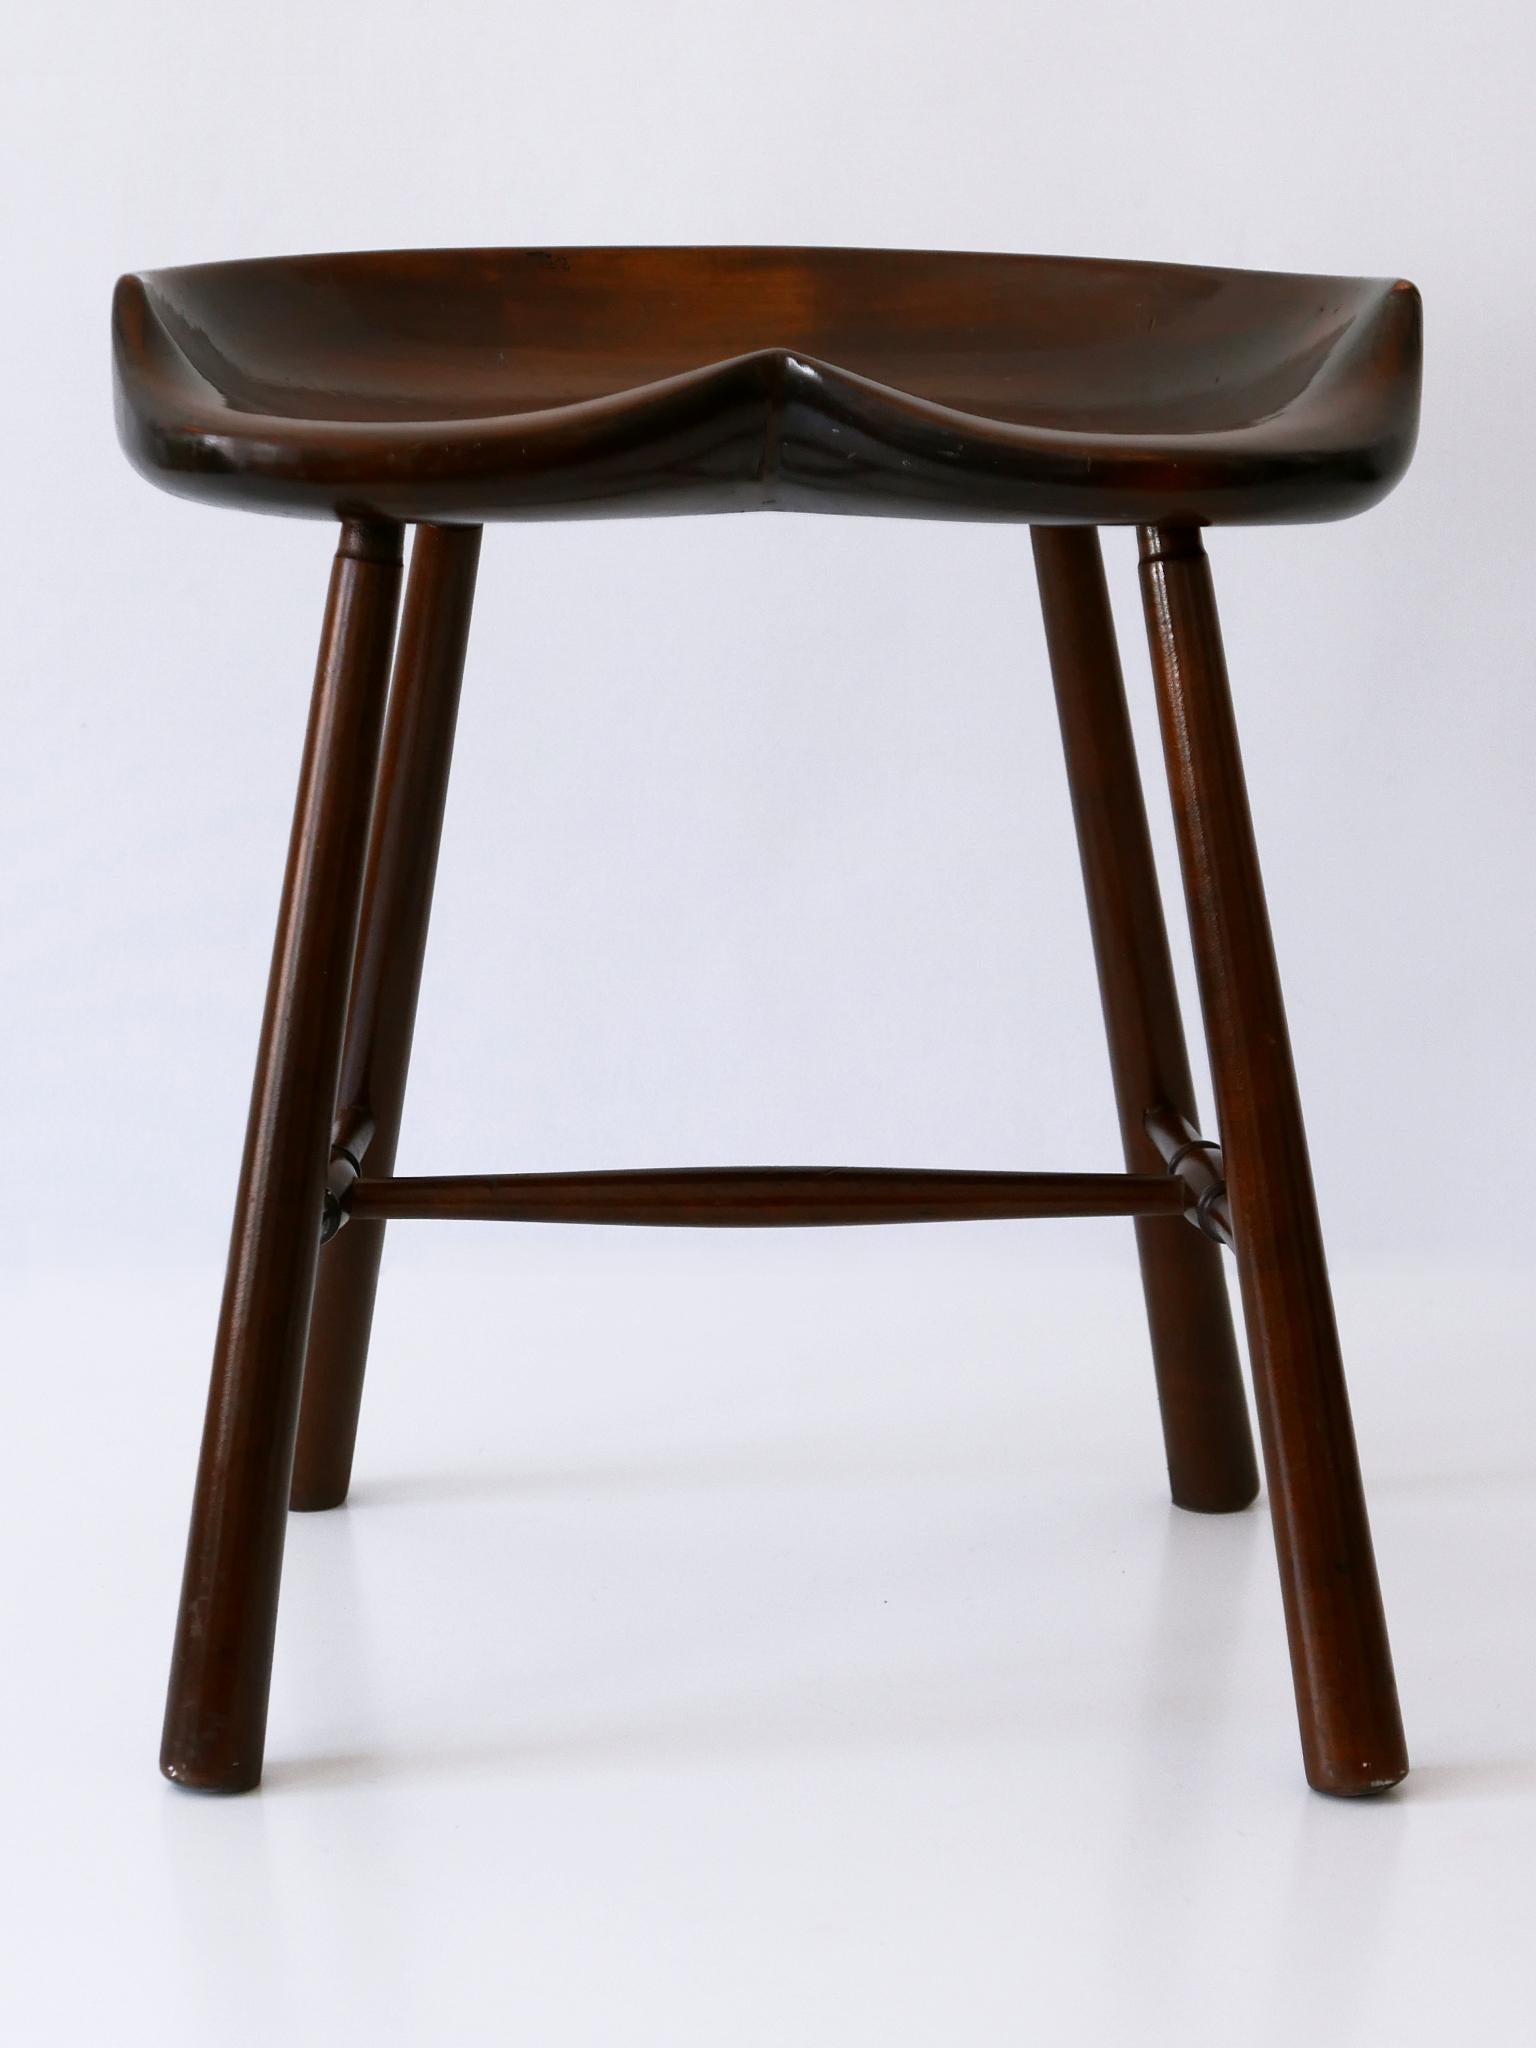 Mid-20th Century Sculptural Mid-Century Modern Solid Wood Stool Germany 1950s For Sale